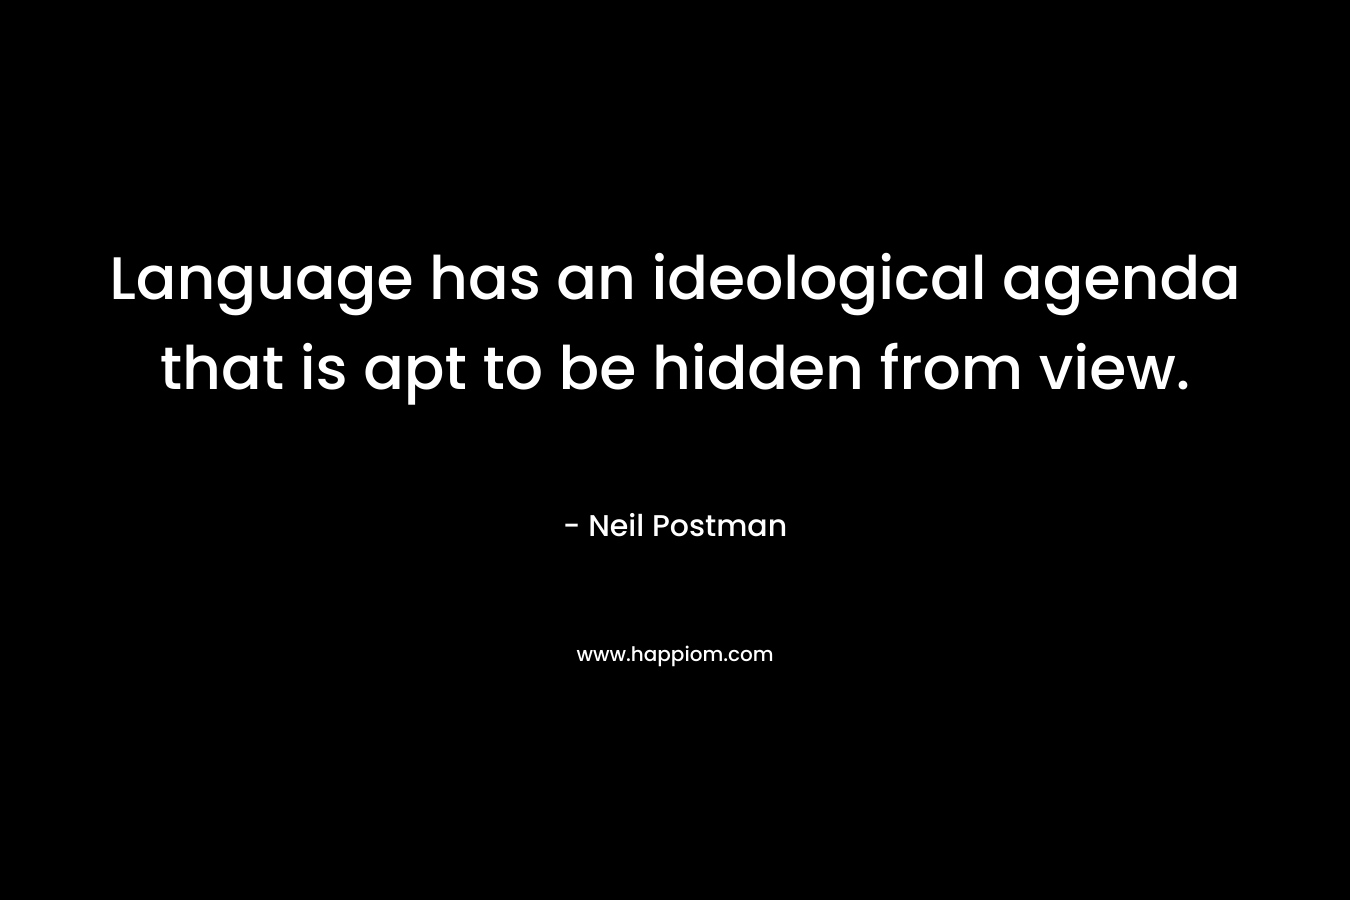 Language has an ideological agenda that is apt to be hidden from view. – Neil Postman